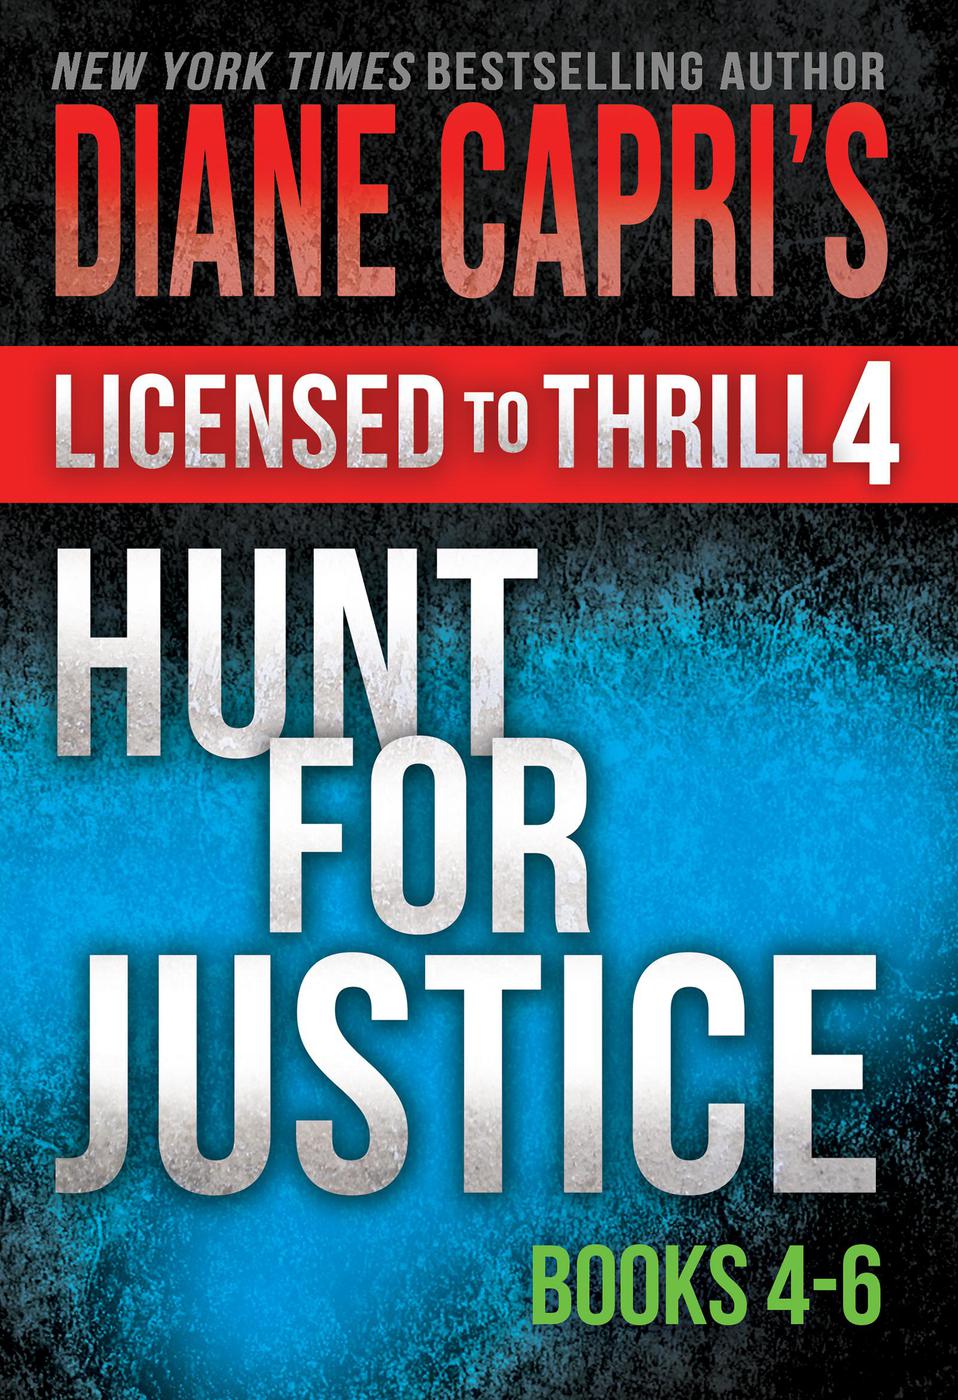 Imagen de portada para Licensed to Thrill 4: Hunt For Justice Series Books 4 - 6 (Diane Capri’s Licensed to Thrill Sets, #4) [electronic resource] :